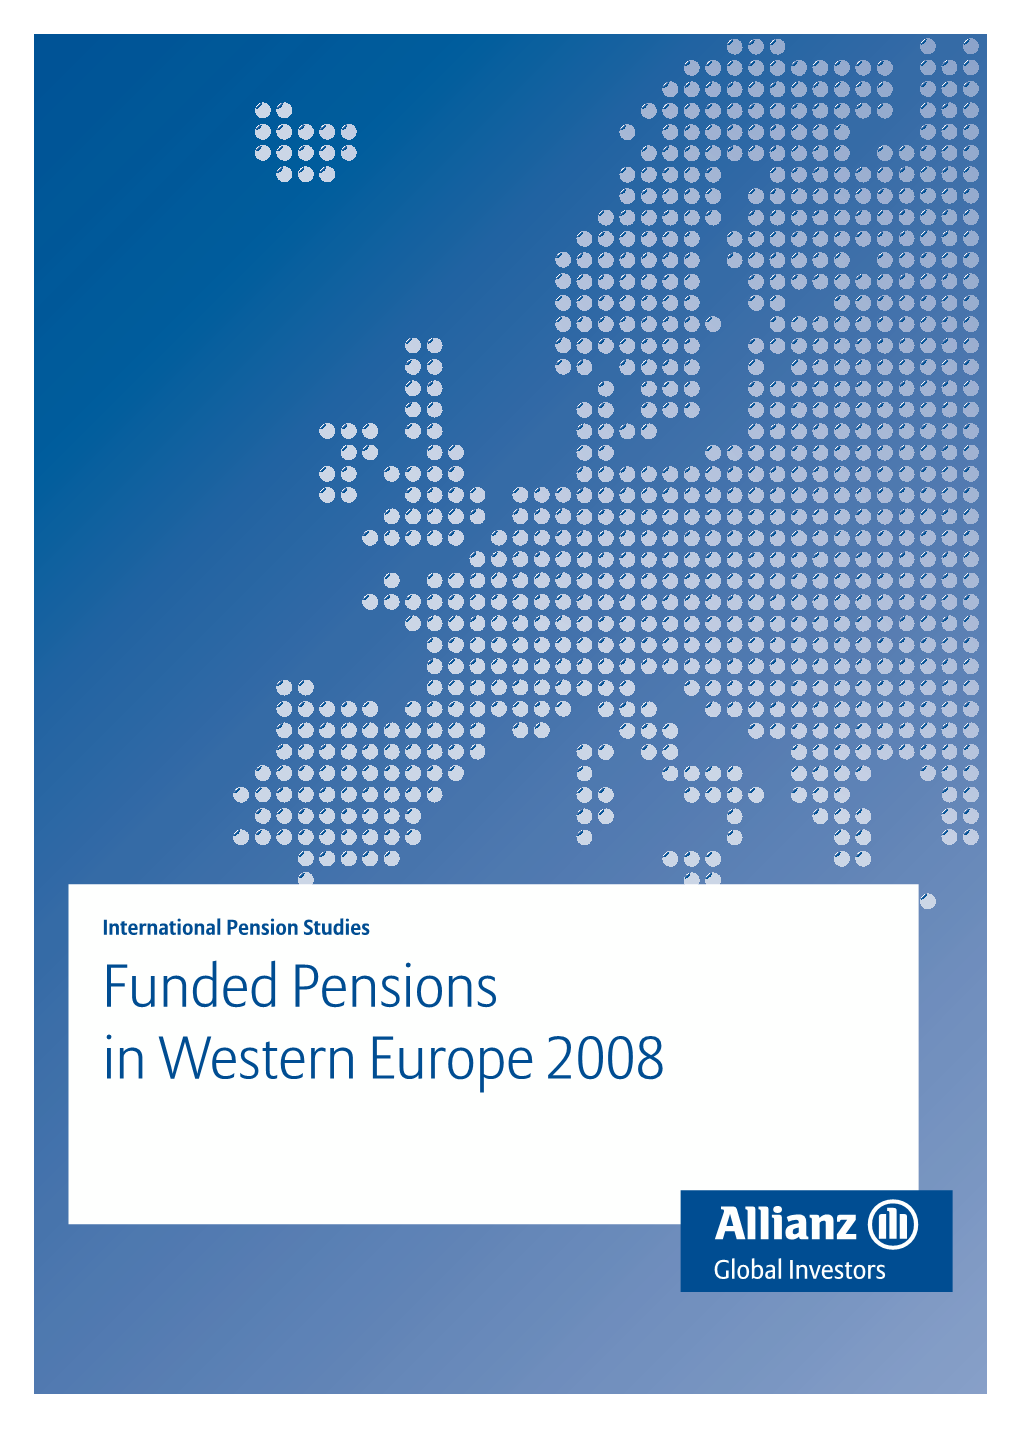 Funded Pensions in Western Europe 2008